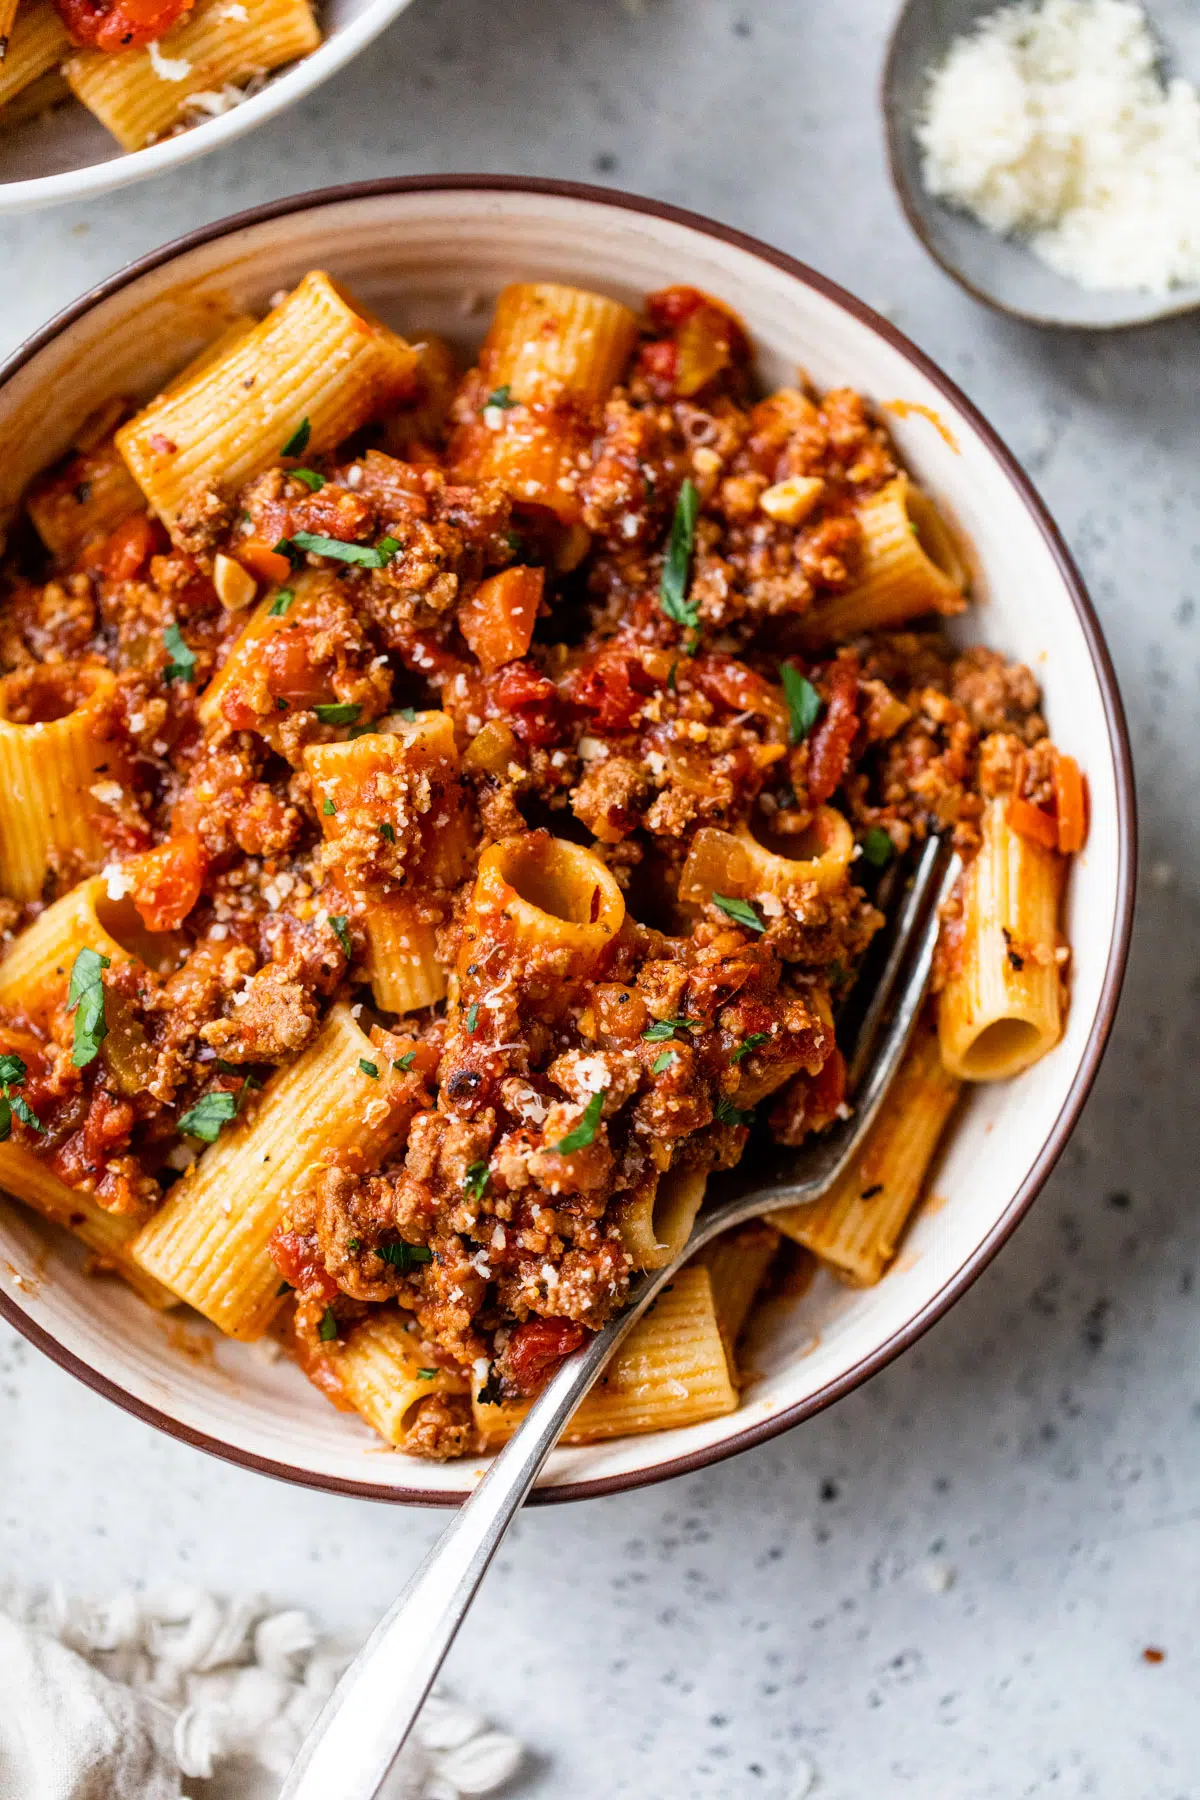 rigatoni in a bowl coated in bolognese sauce